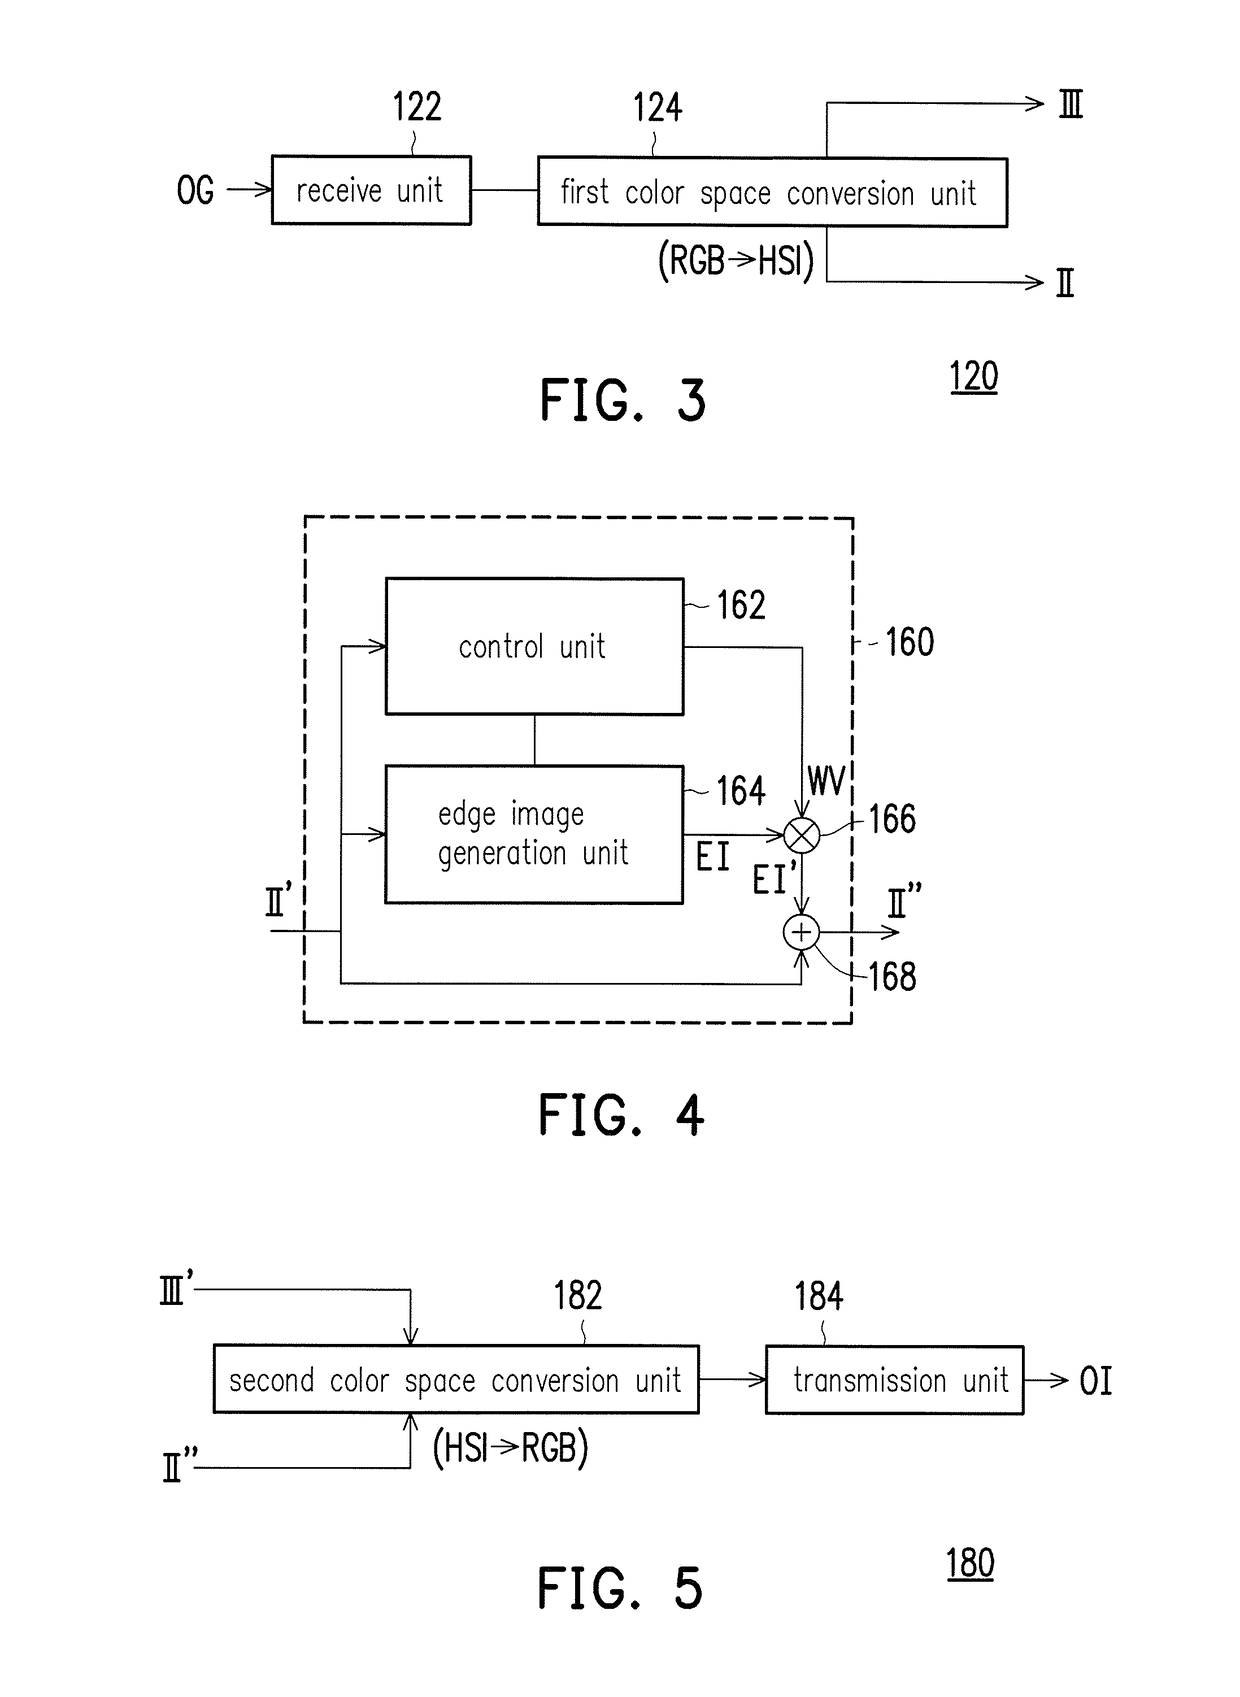 Image enhancement method and image processing apparatus thereof